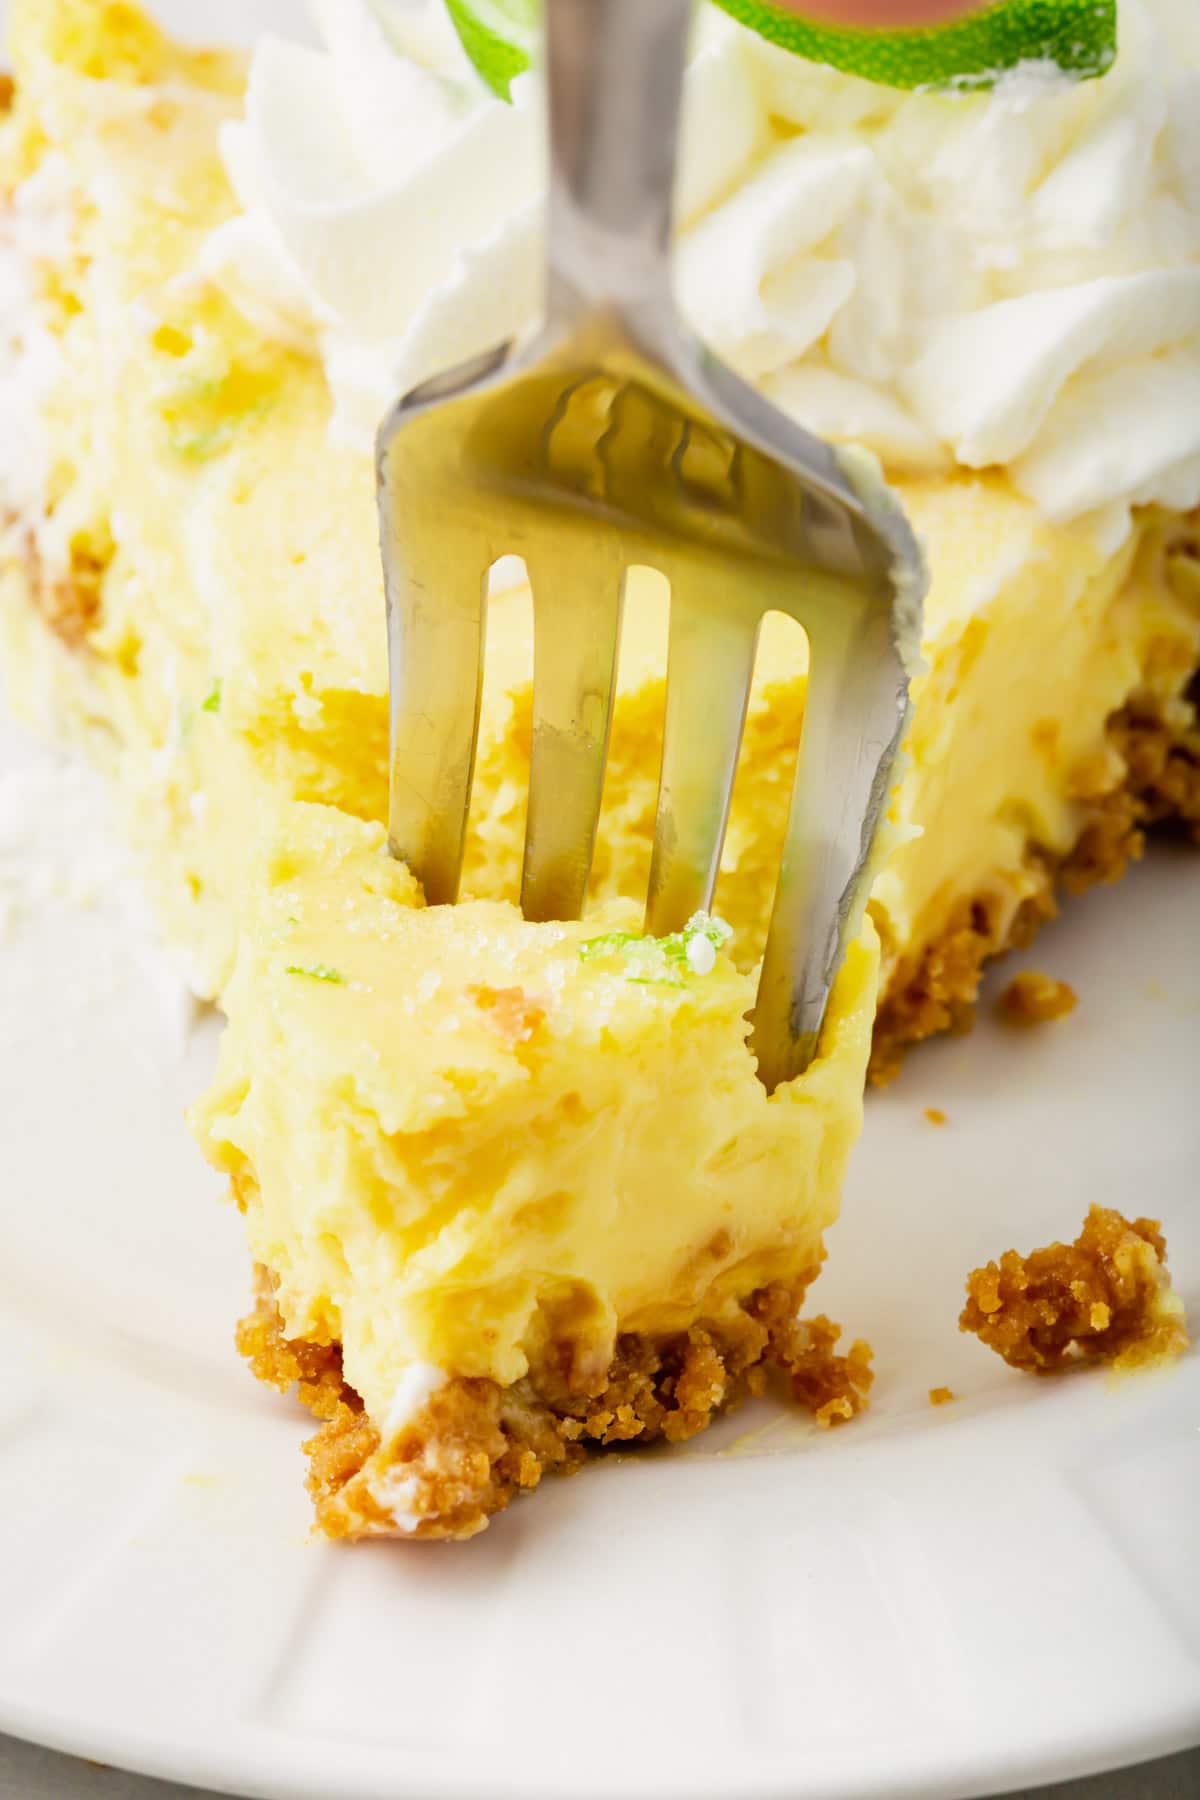 A close-up of a fork breaking off a bite of key lime pie.